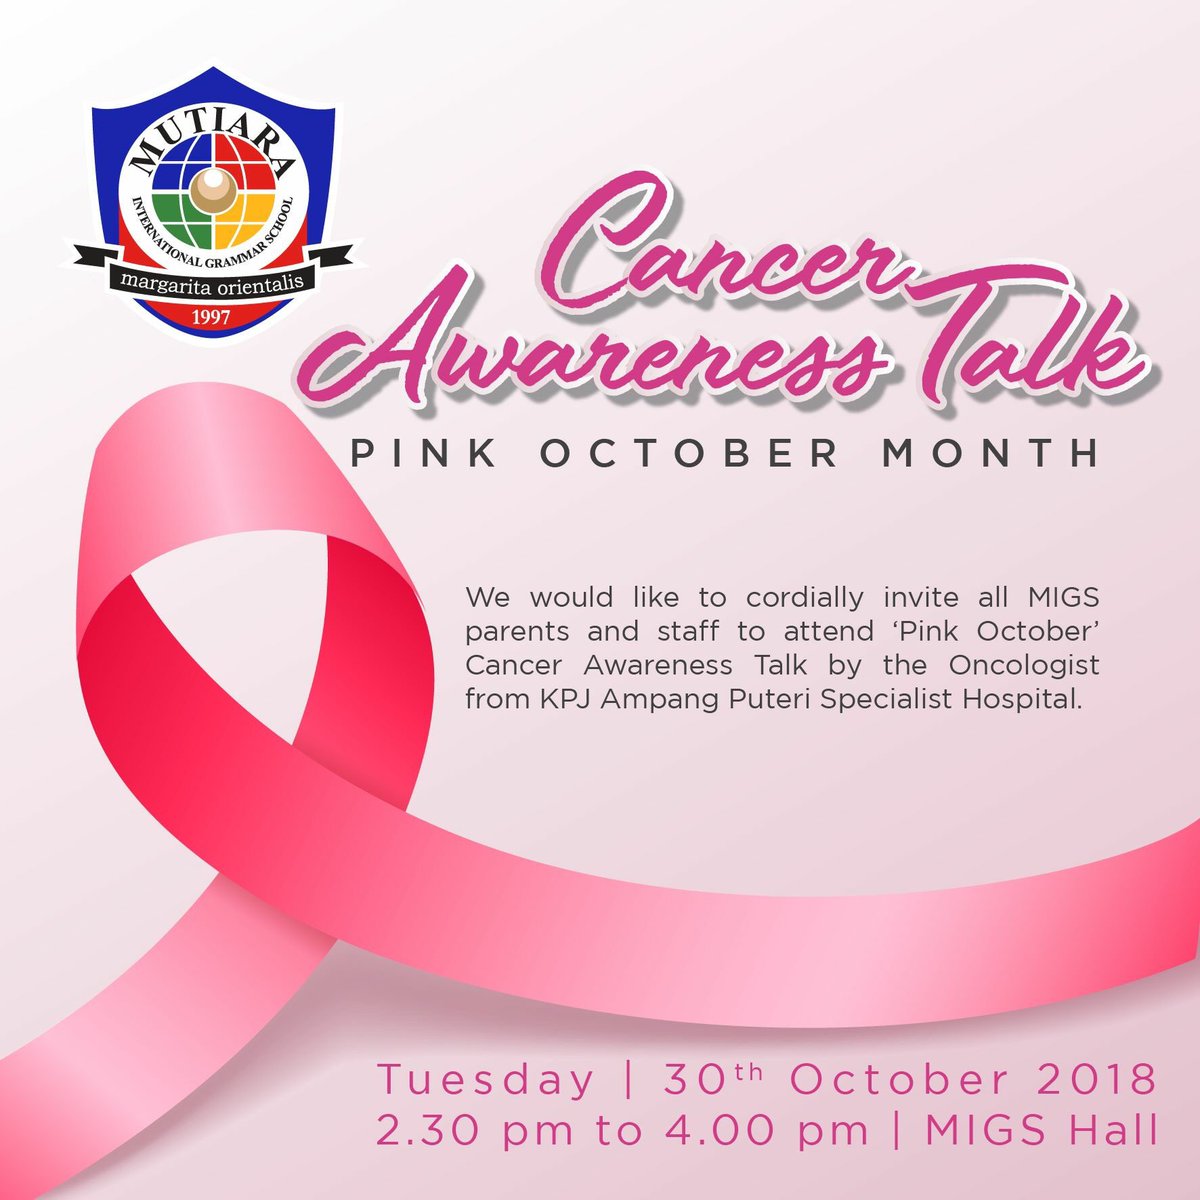 Cancer Awareness Talk on Tuesday, 30th October 2018. For all parents... Join us!! Kindly do not forget to RSVP!
#migs #migskl #lookingforward #pinkoctober #cancerawareness #welcome2018